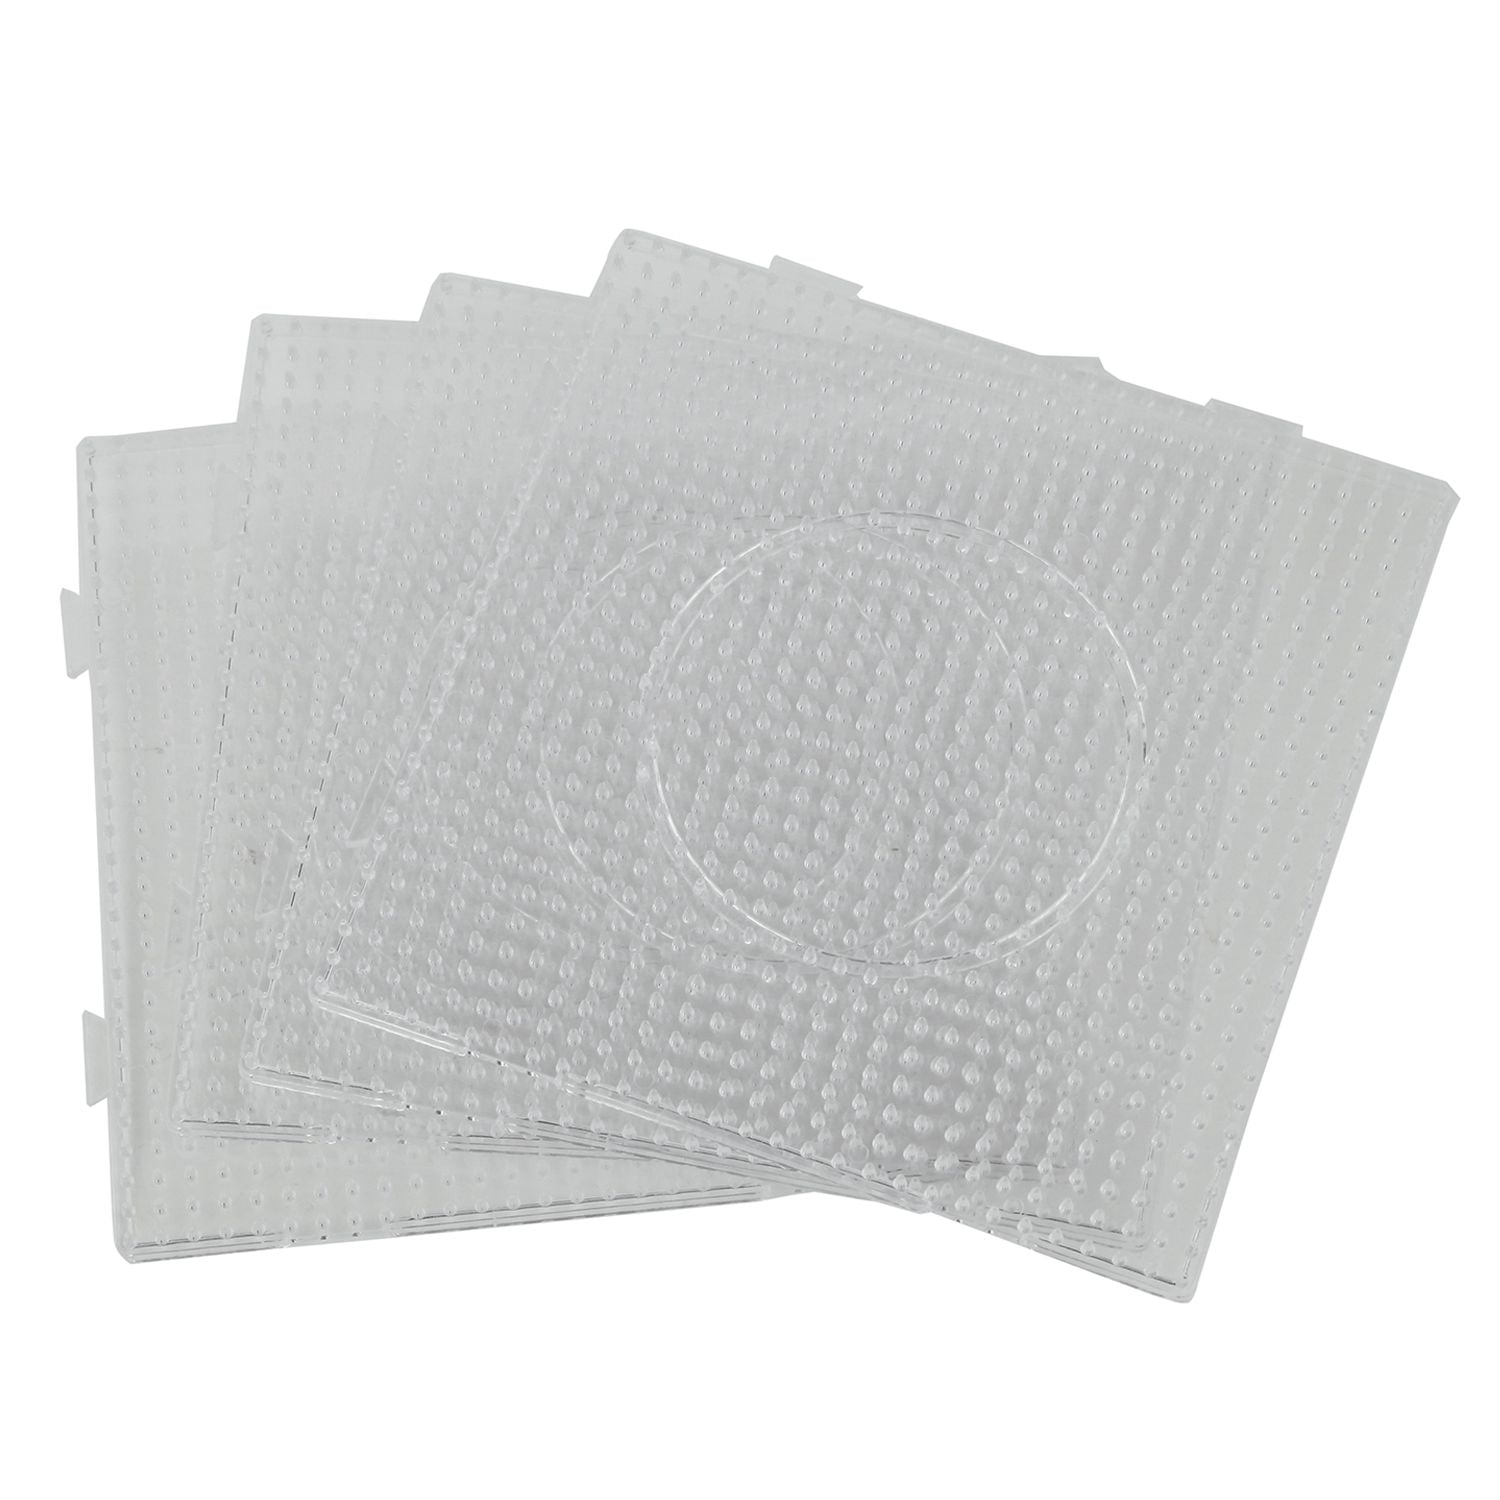 Hama 4pcs ABC Clear 145x145mm Square Large Pegboards Ironing Board for Hama Fuse Perler B j1 